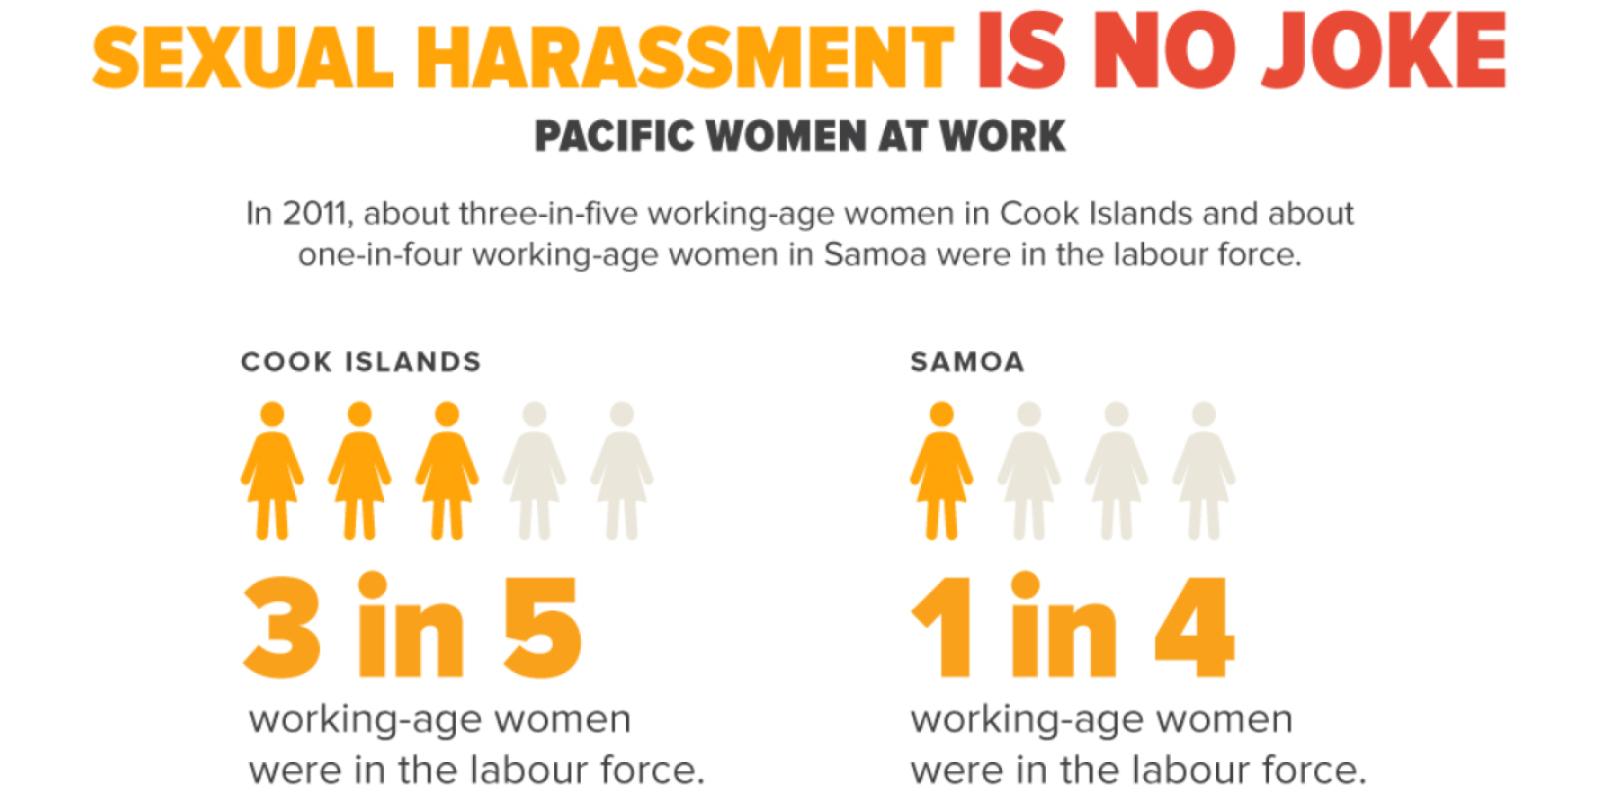 In 2011, about three-in-five working-age women in Cook Islands and about one-in-four working-age women in Samoa were in the labour force.